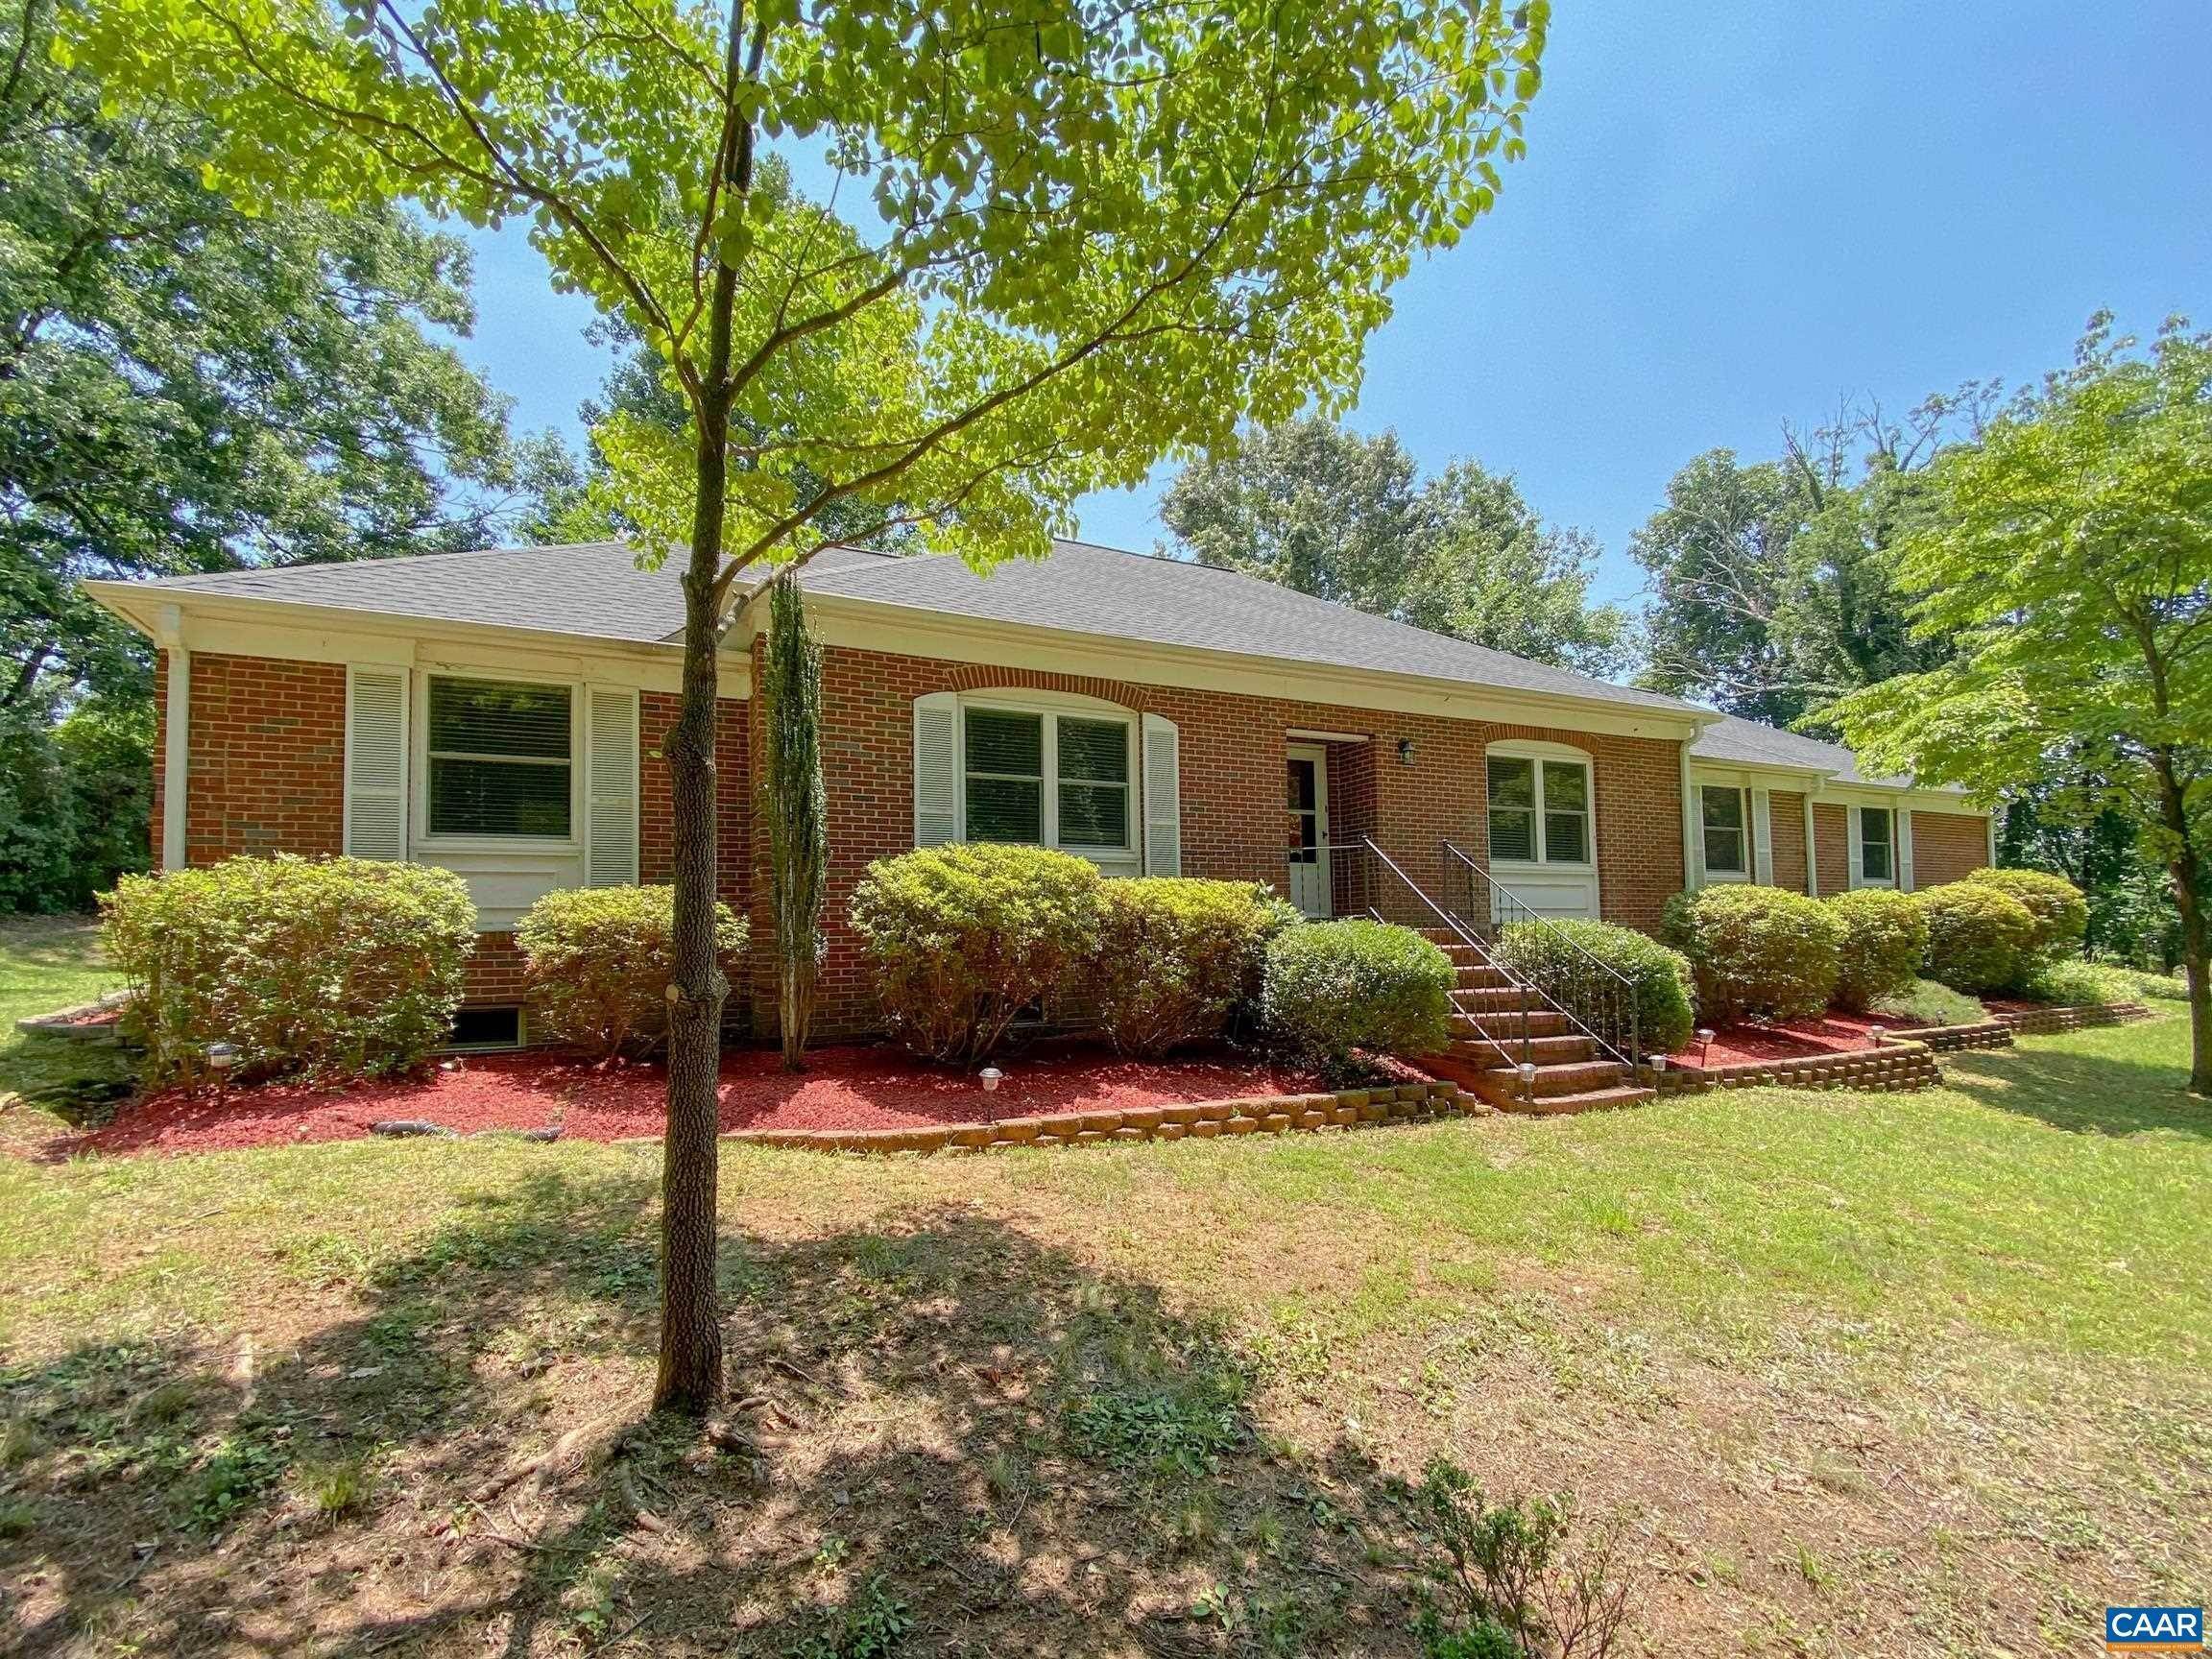 2. Single Family Homes for Sale at 855 CHAPEL HILL Road Charlottesville, Virginia 22901 United States